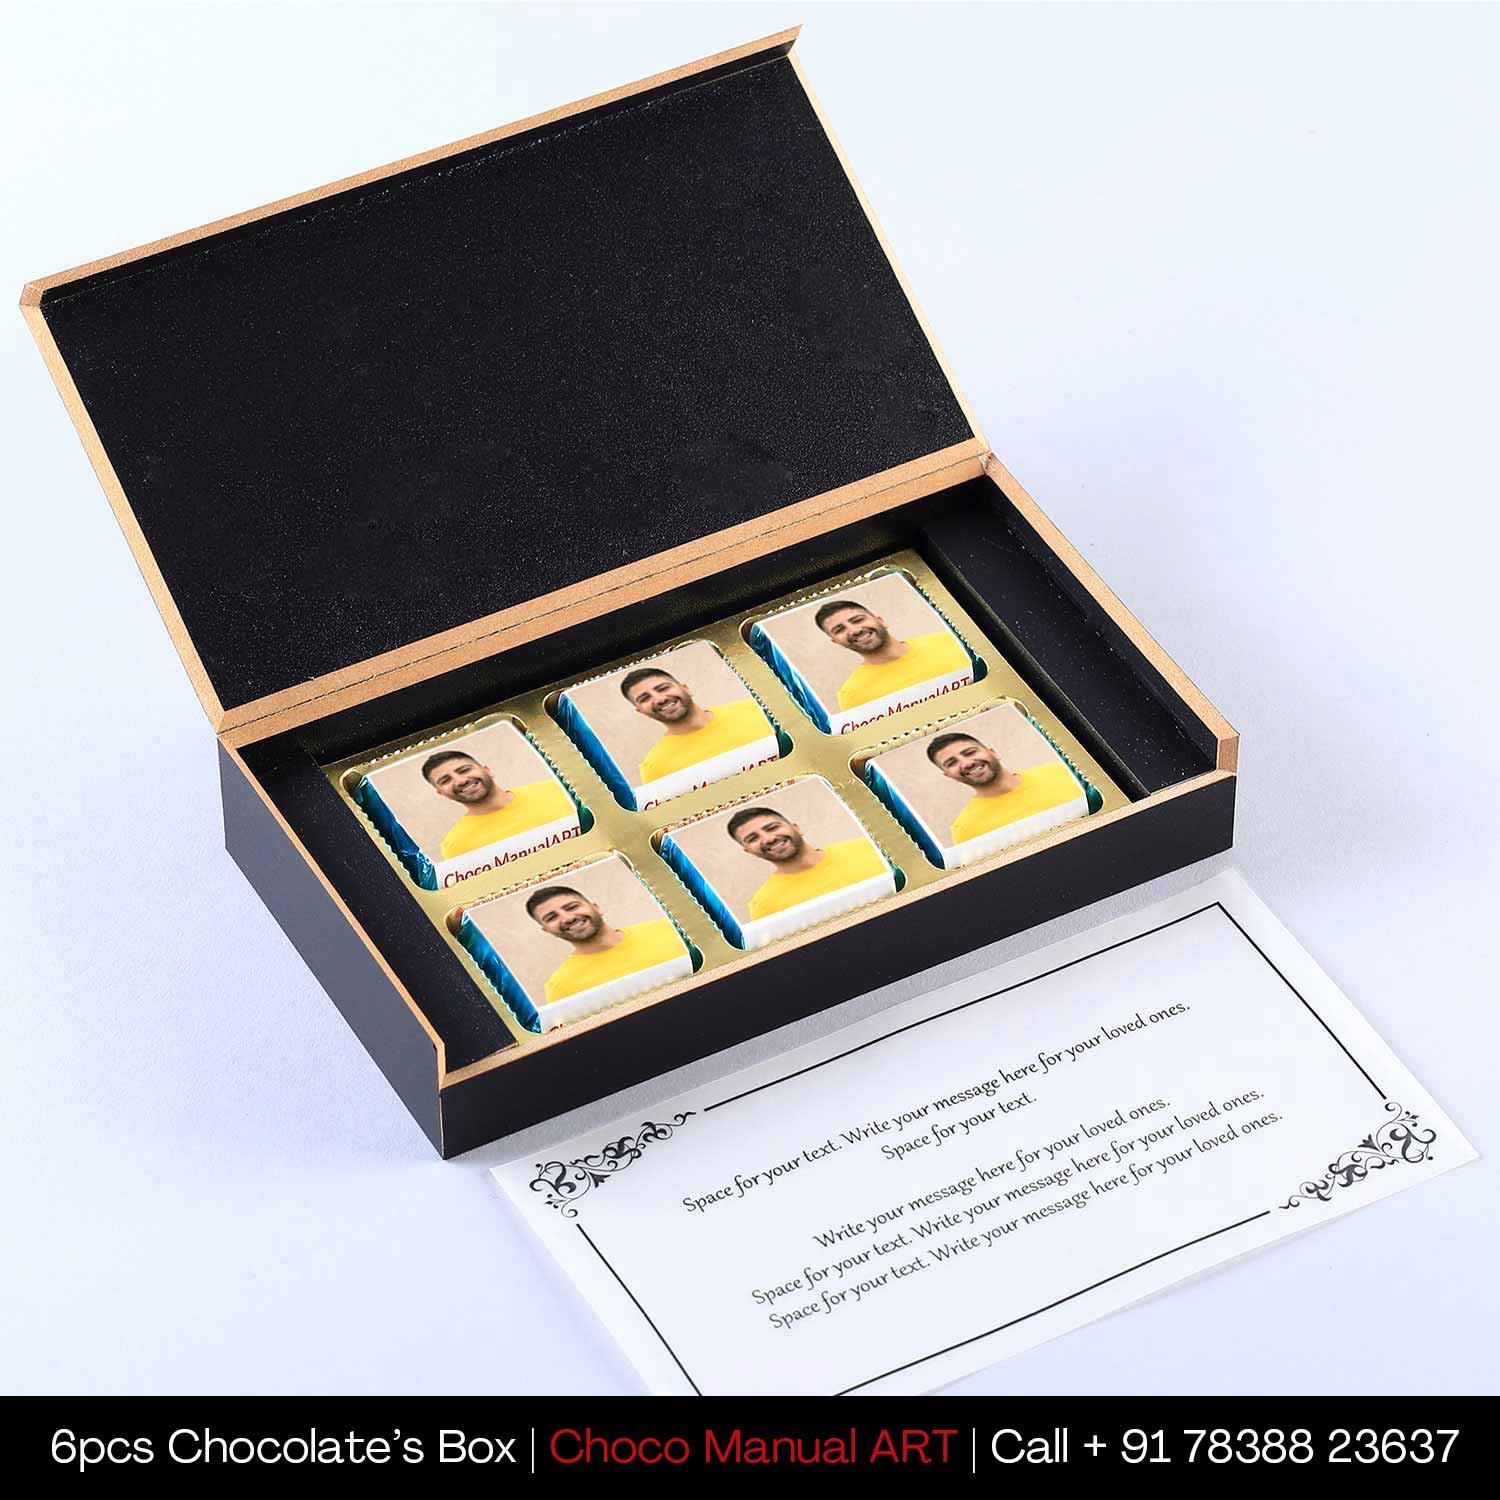 Personalised chocolates with photo and name print